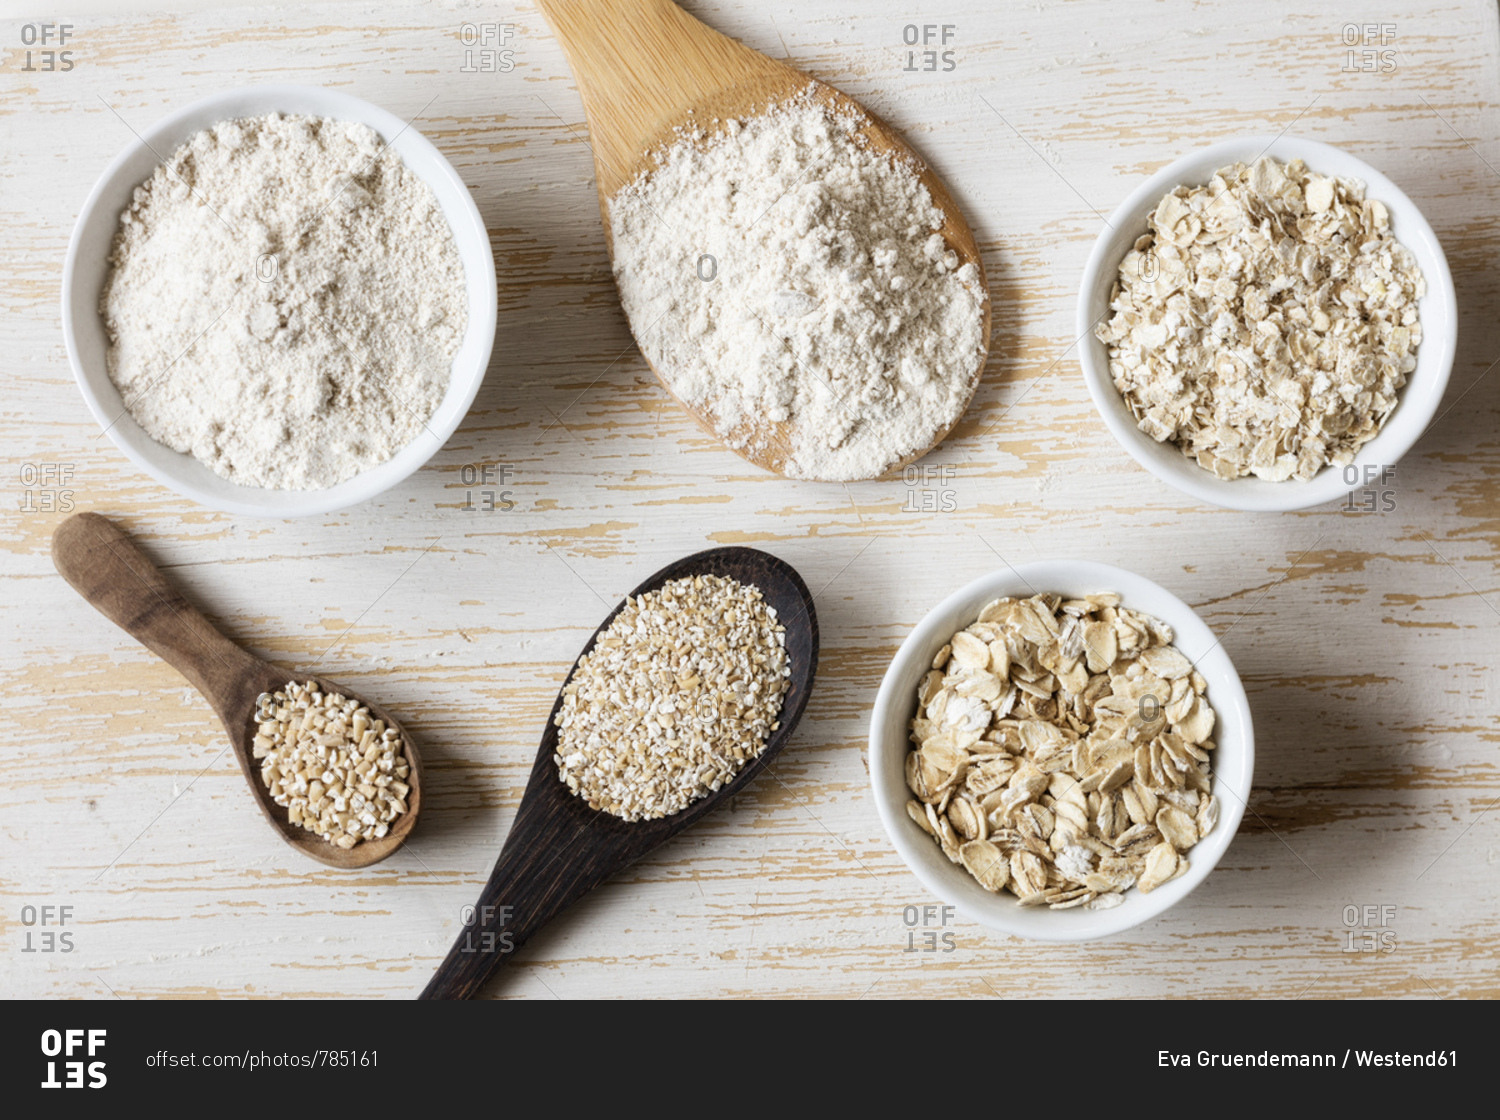 Two variations of oat flakes- oat bran- oatmeal and steel-cut oats